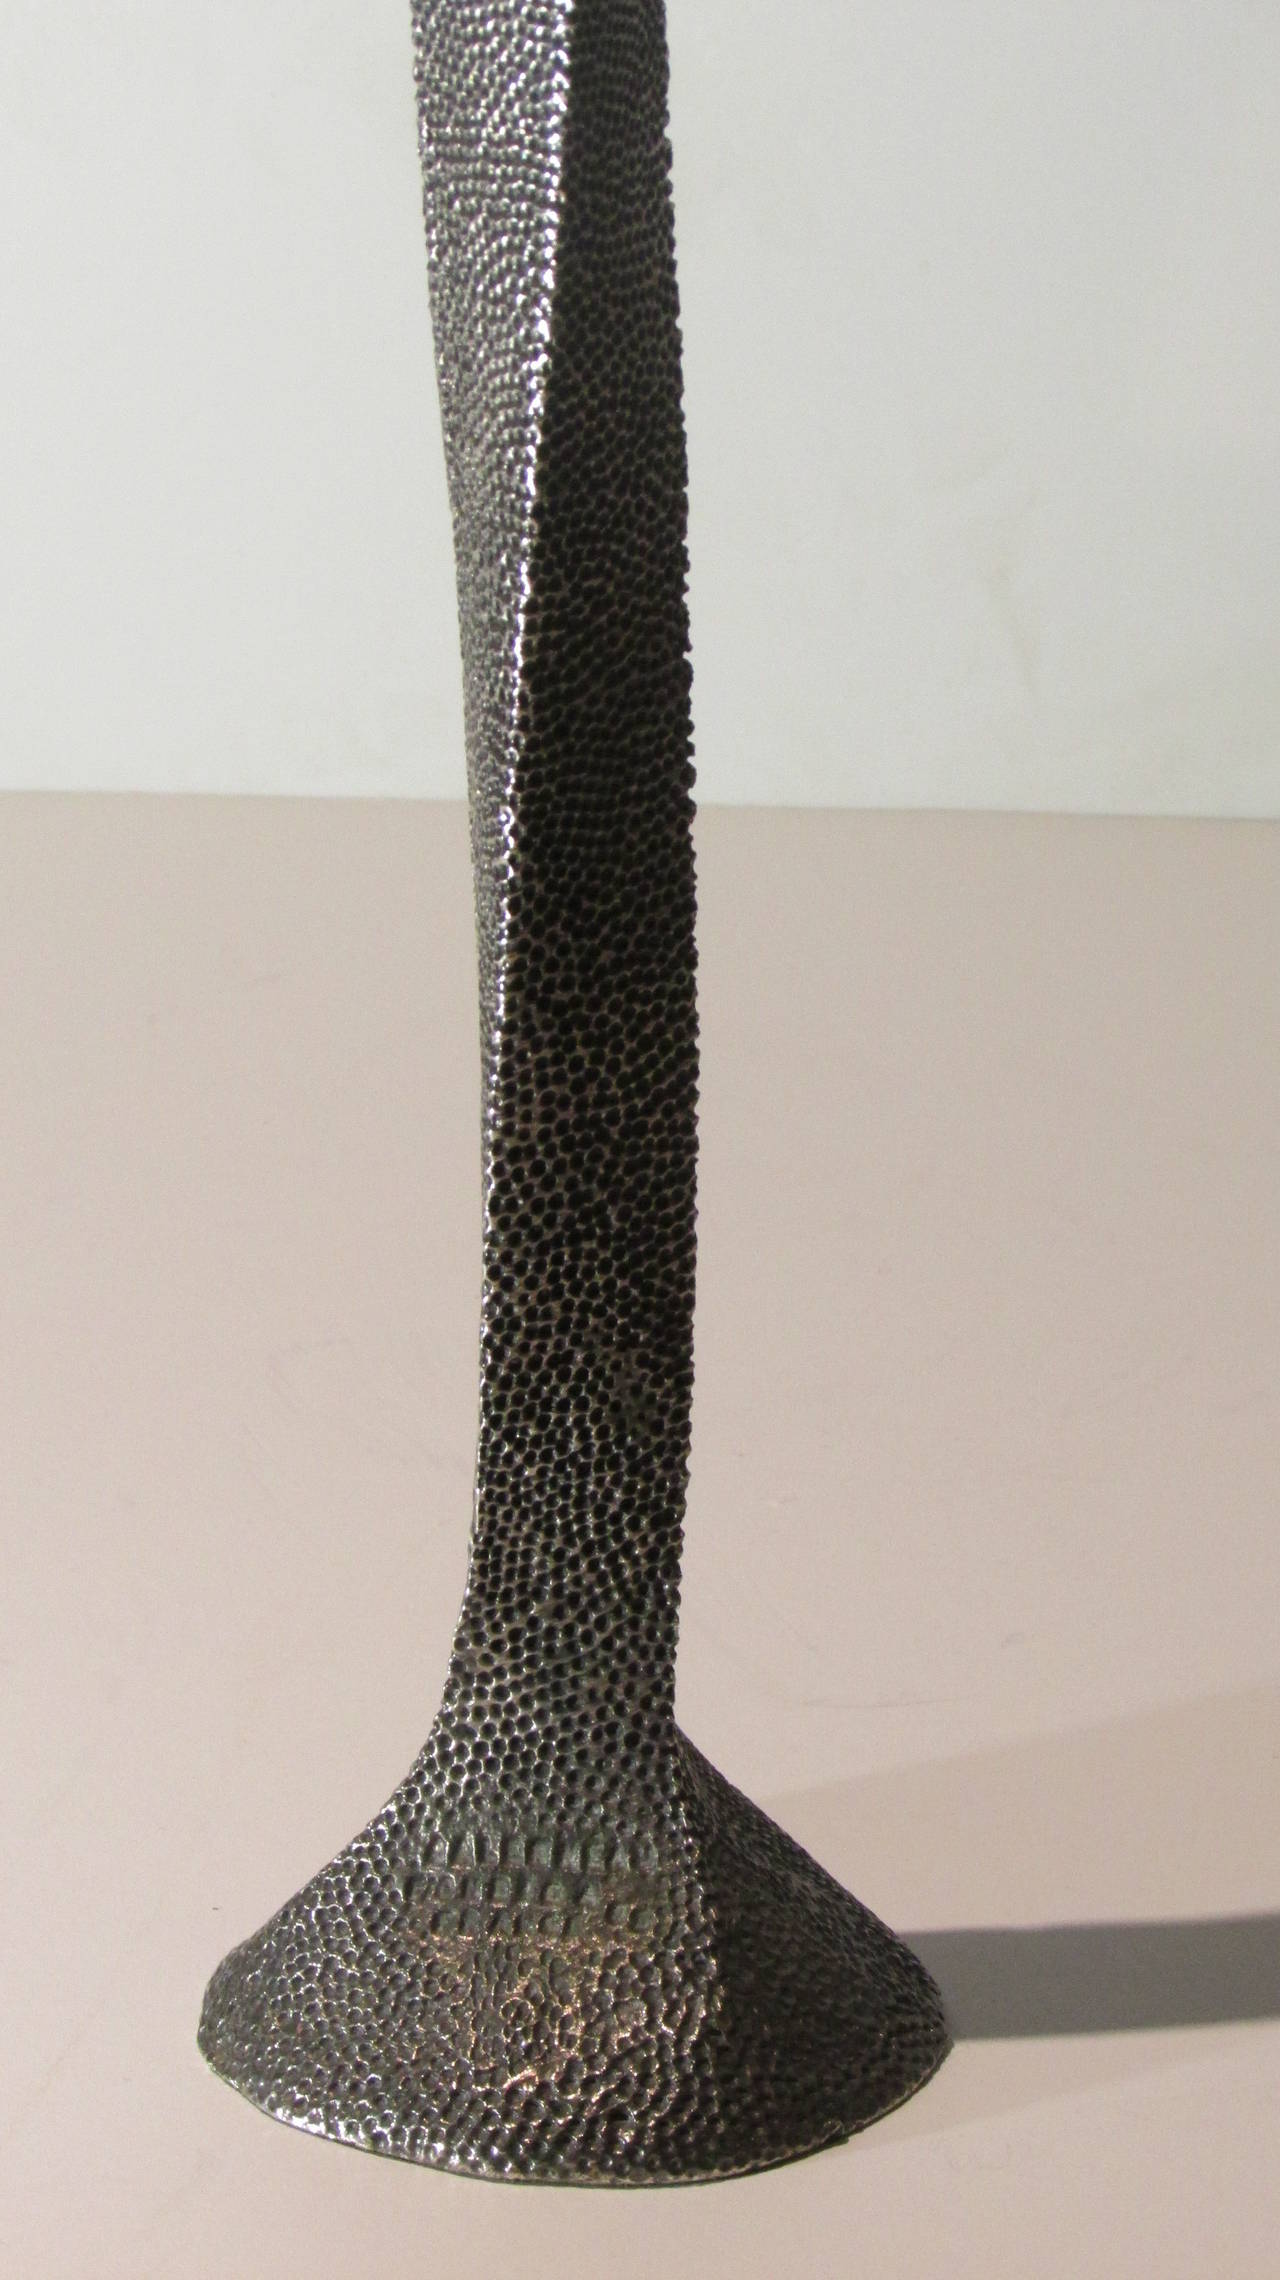 A gun silver finish metal candlestick with an exotic sinuous tall form and a very finely detailed shagreen stingray skin like textured surface by Stephane Galerneau for Fondica, France, 1995. Stamped signed into metal at lower base.